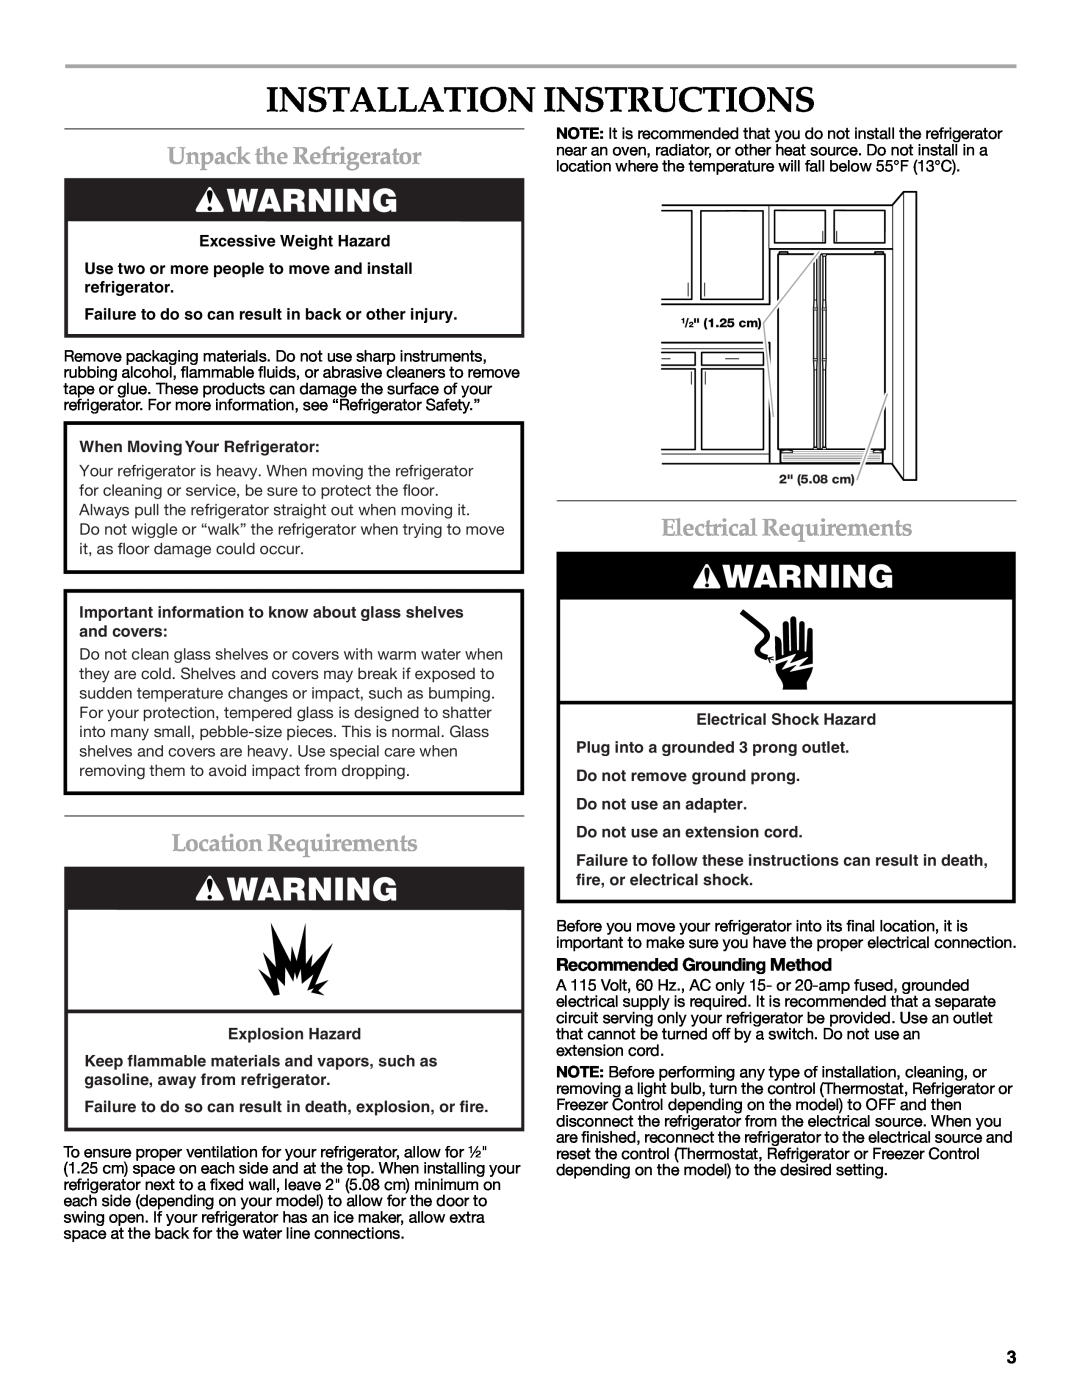 KitchenAid KSRF25FRBT01 Installation Instructions, Unpack the Refrigerator, Location Requirements, Electrical Requirements 